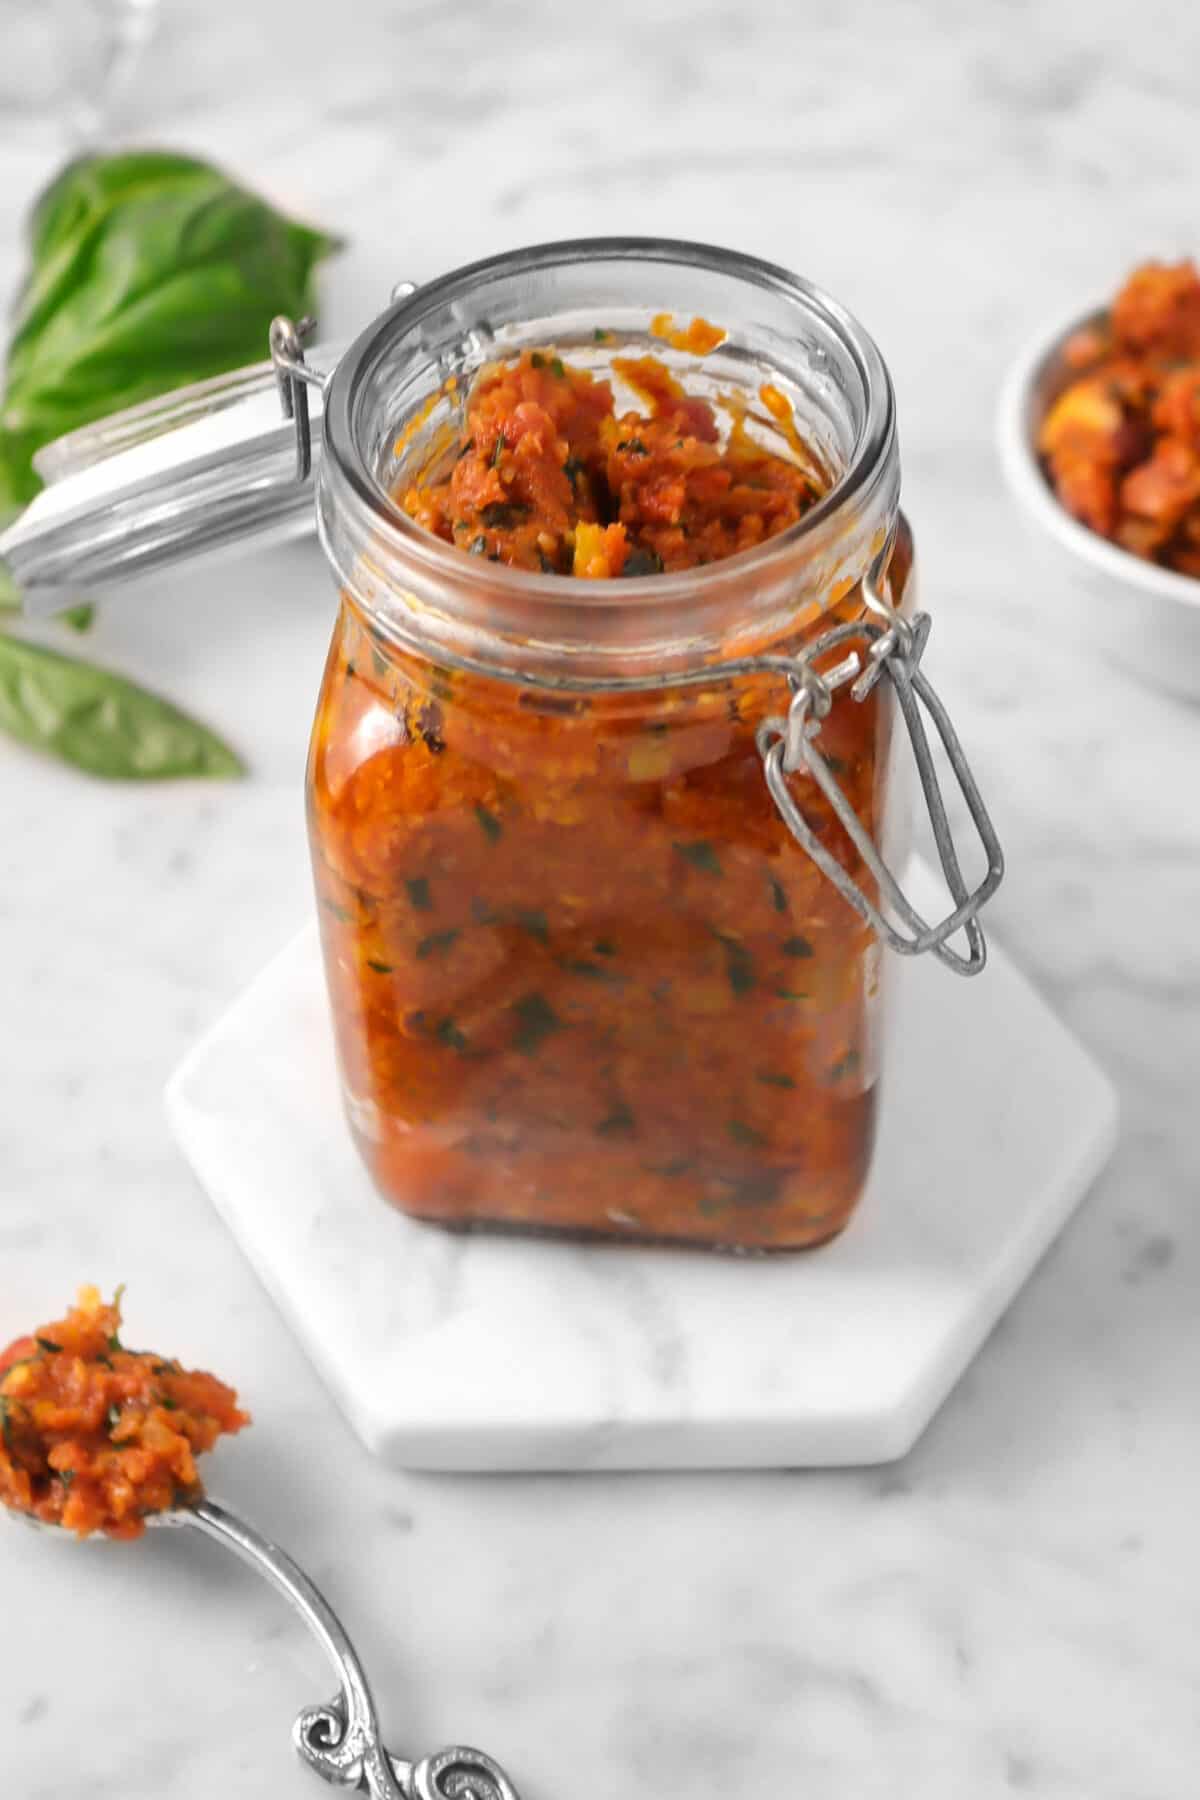 tomato pesto in a glass jar with basil leaves and a spoonful of pesto on a marble counter